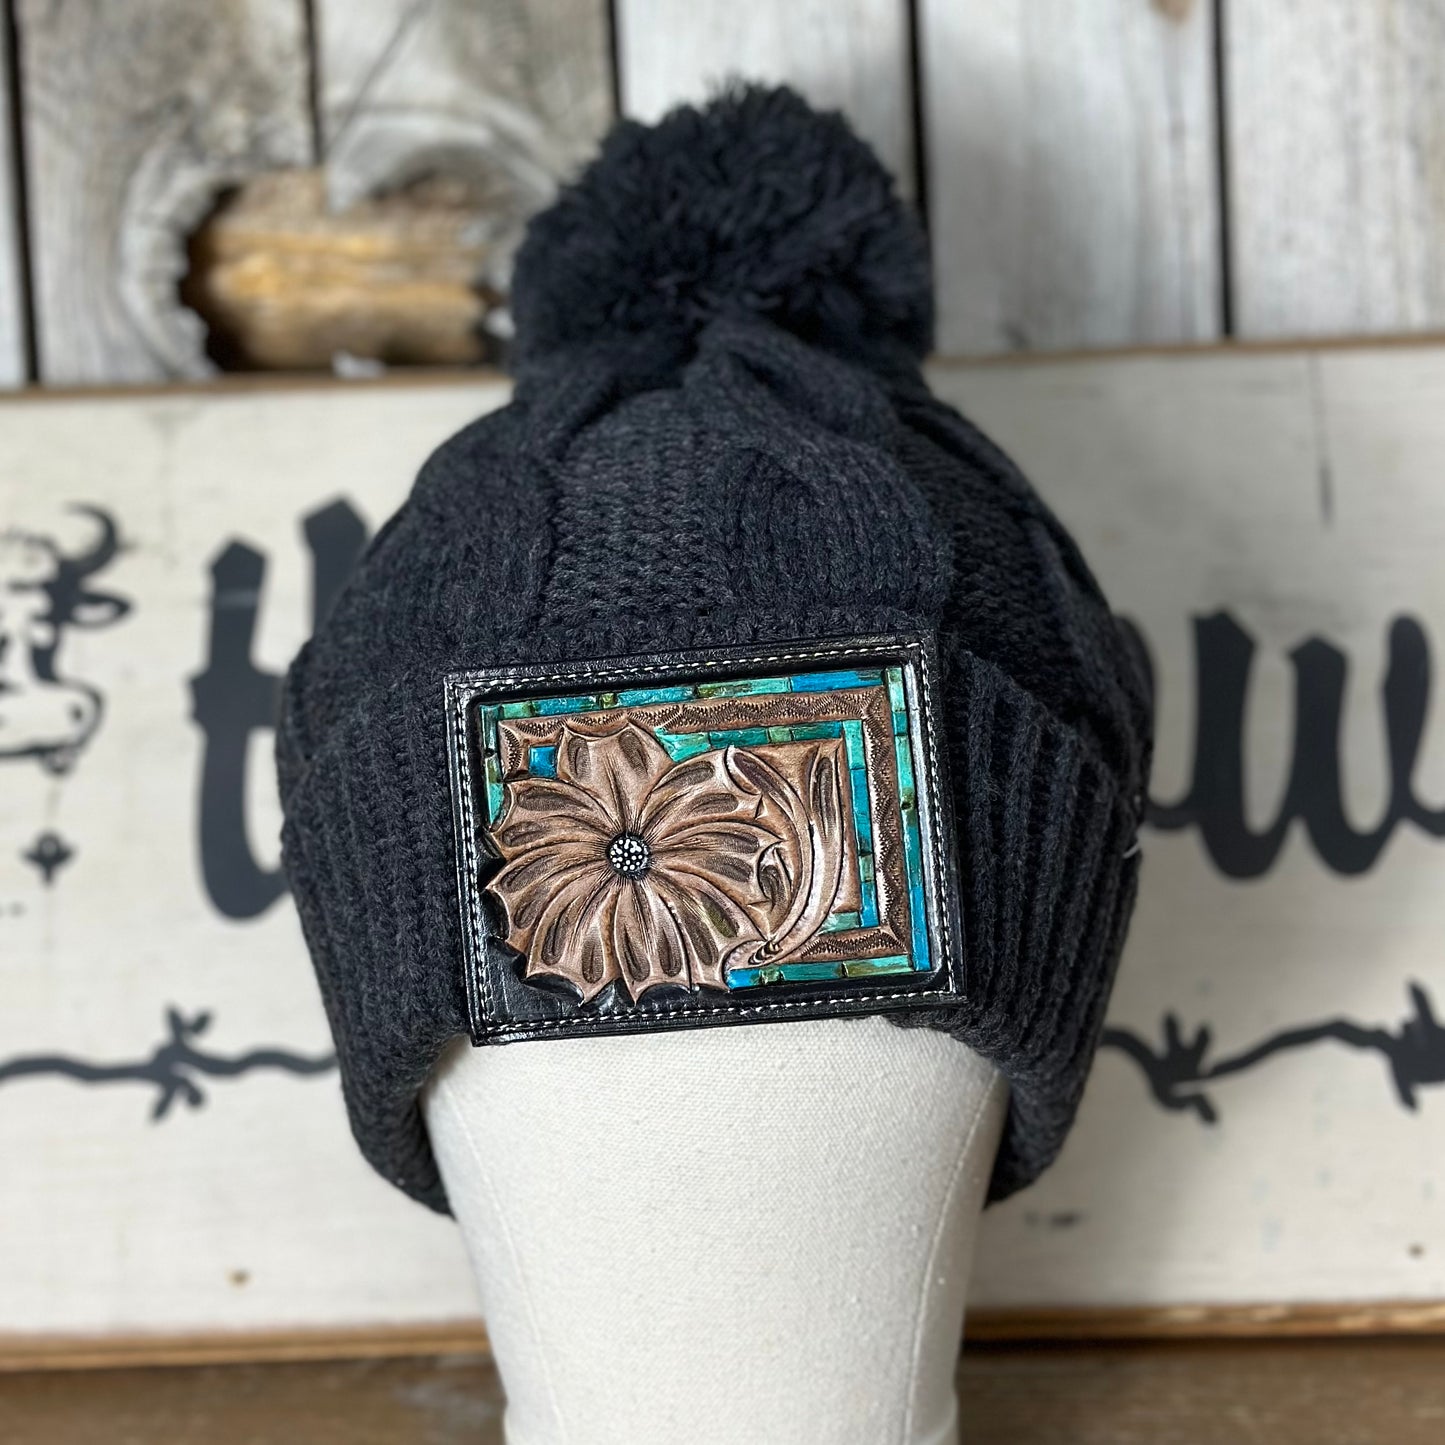 Amanda Rose Chunky Cable Knit Beanie w/ Pom and Hand Tooled Patch